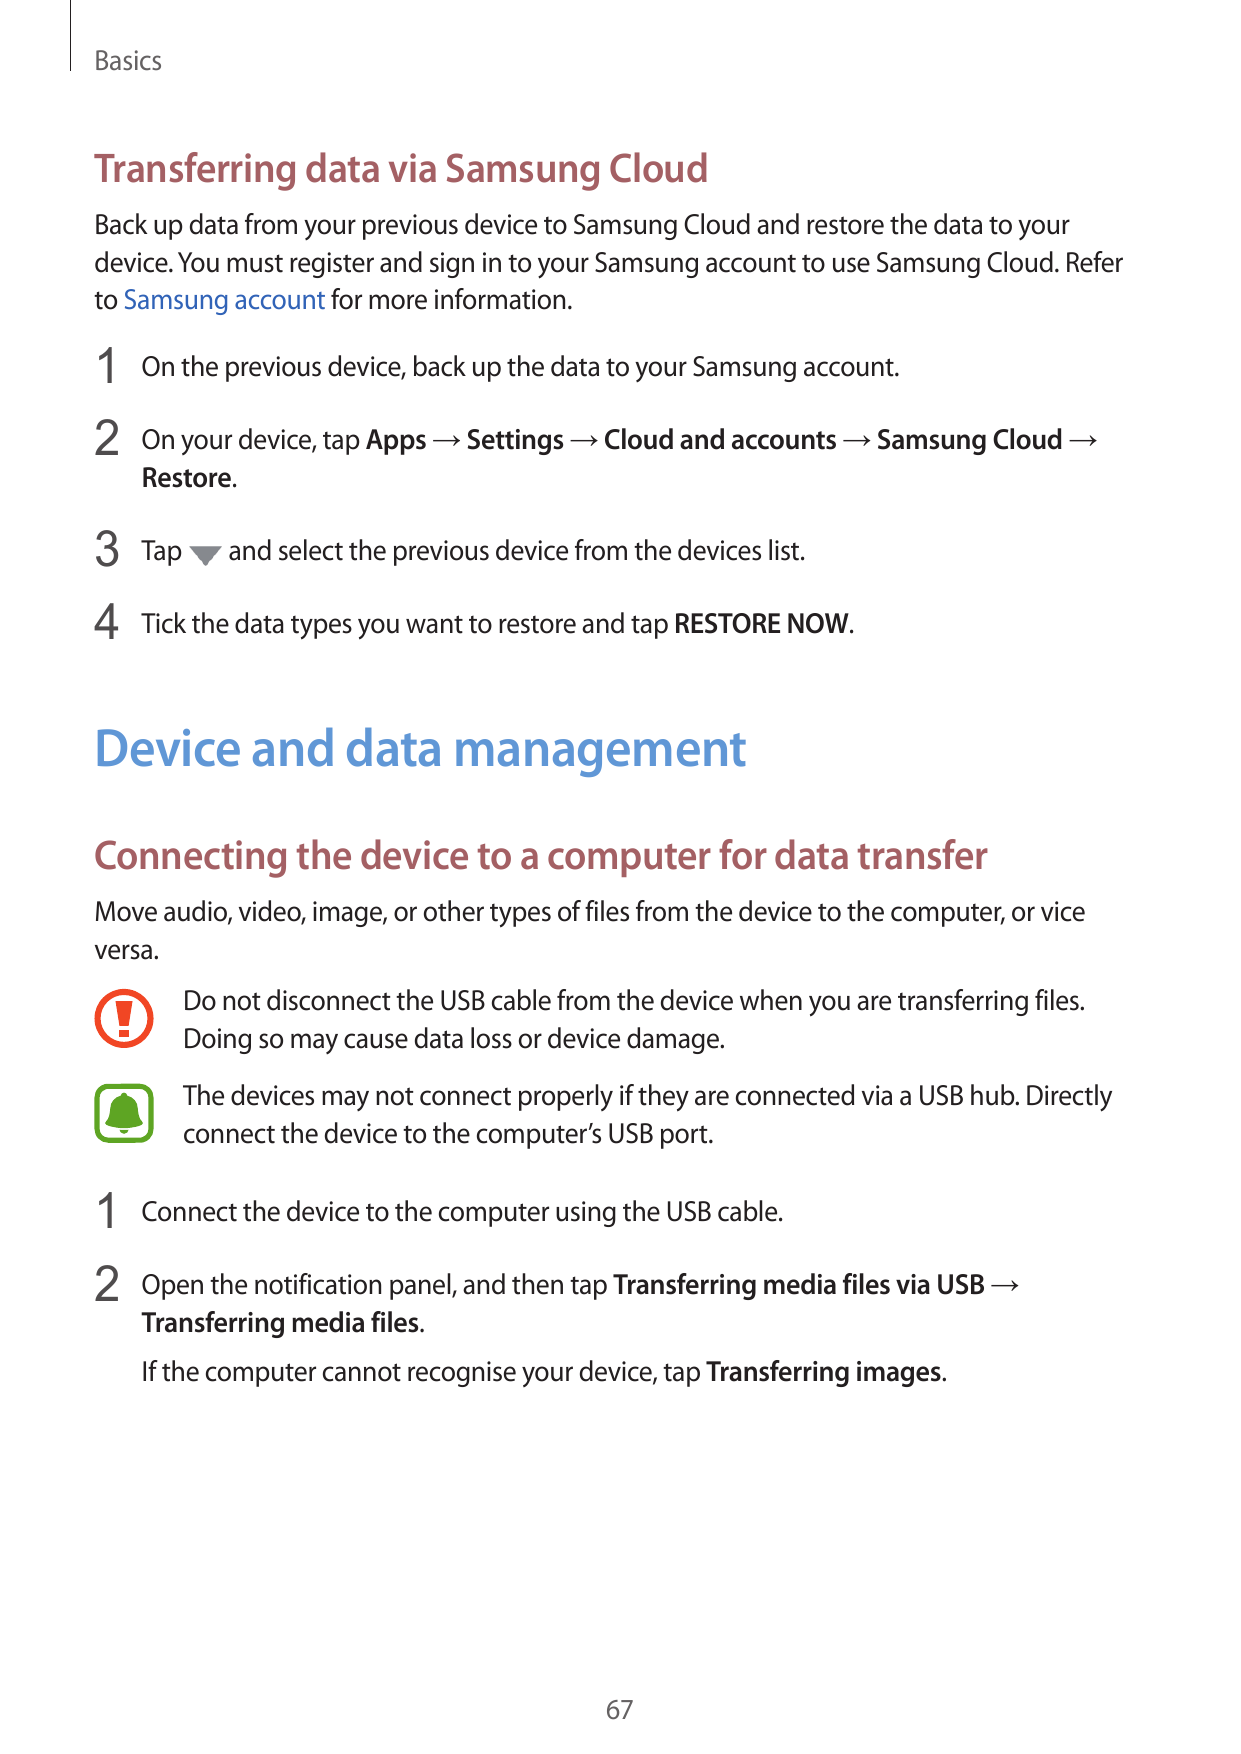 BasicsTransferring data via Samsung CloudBack up data from your previous device to Samsung Cloud and restore the data to yourdev